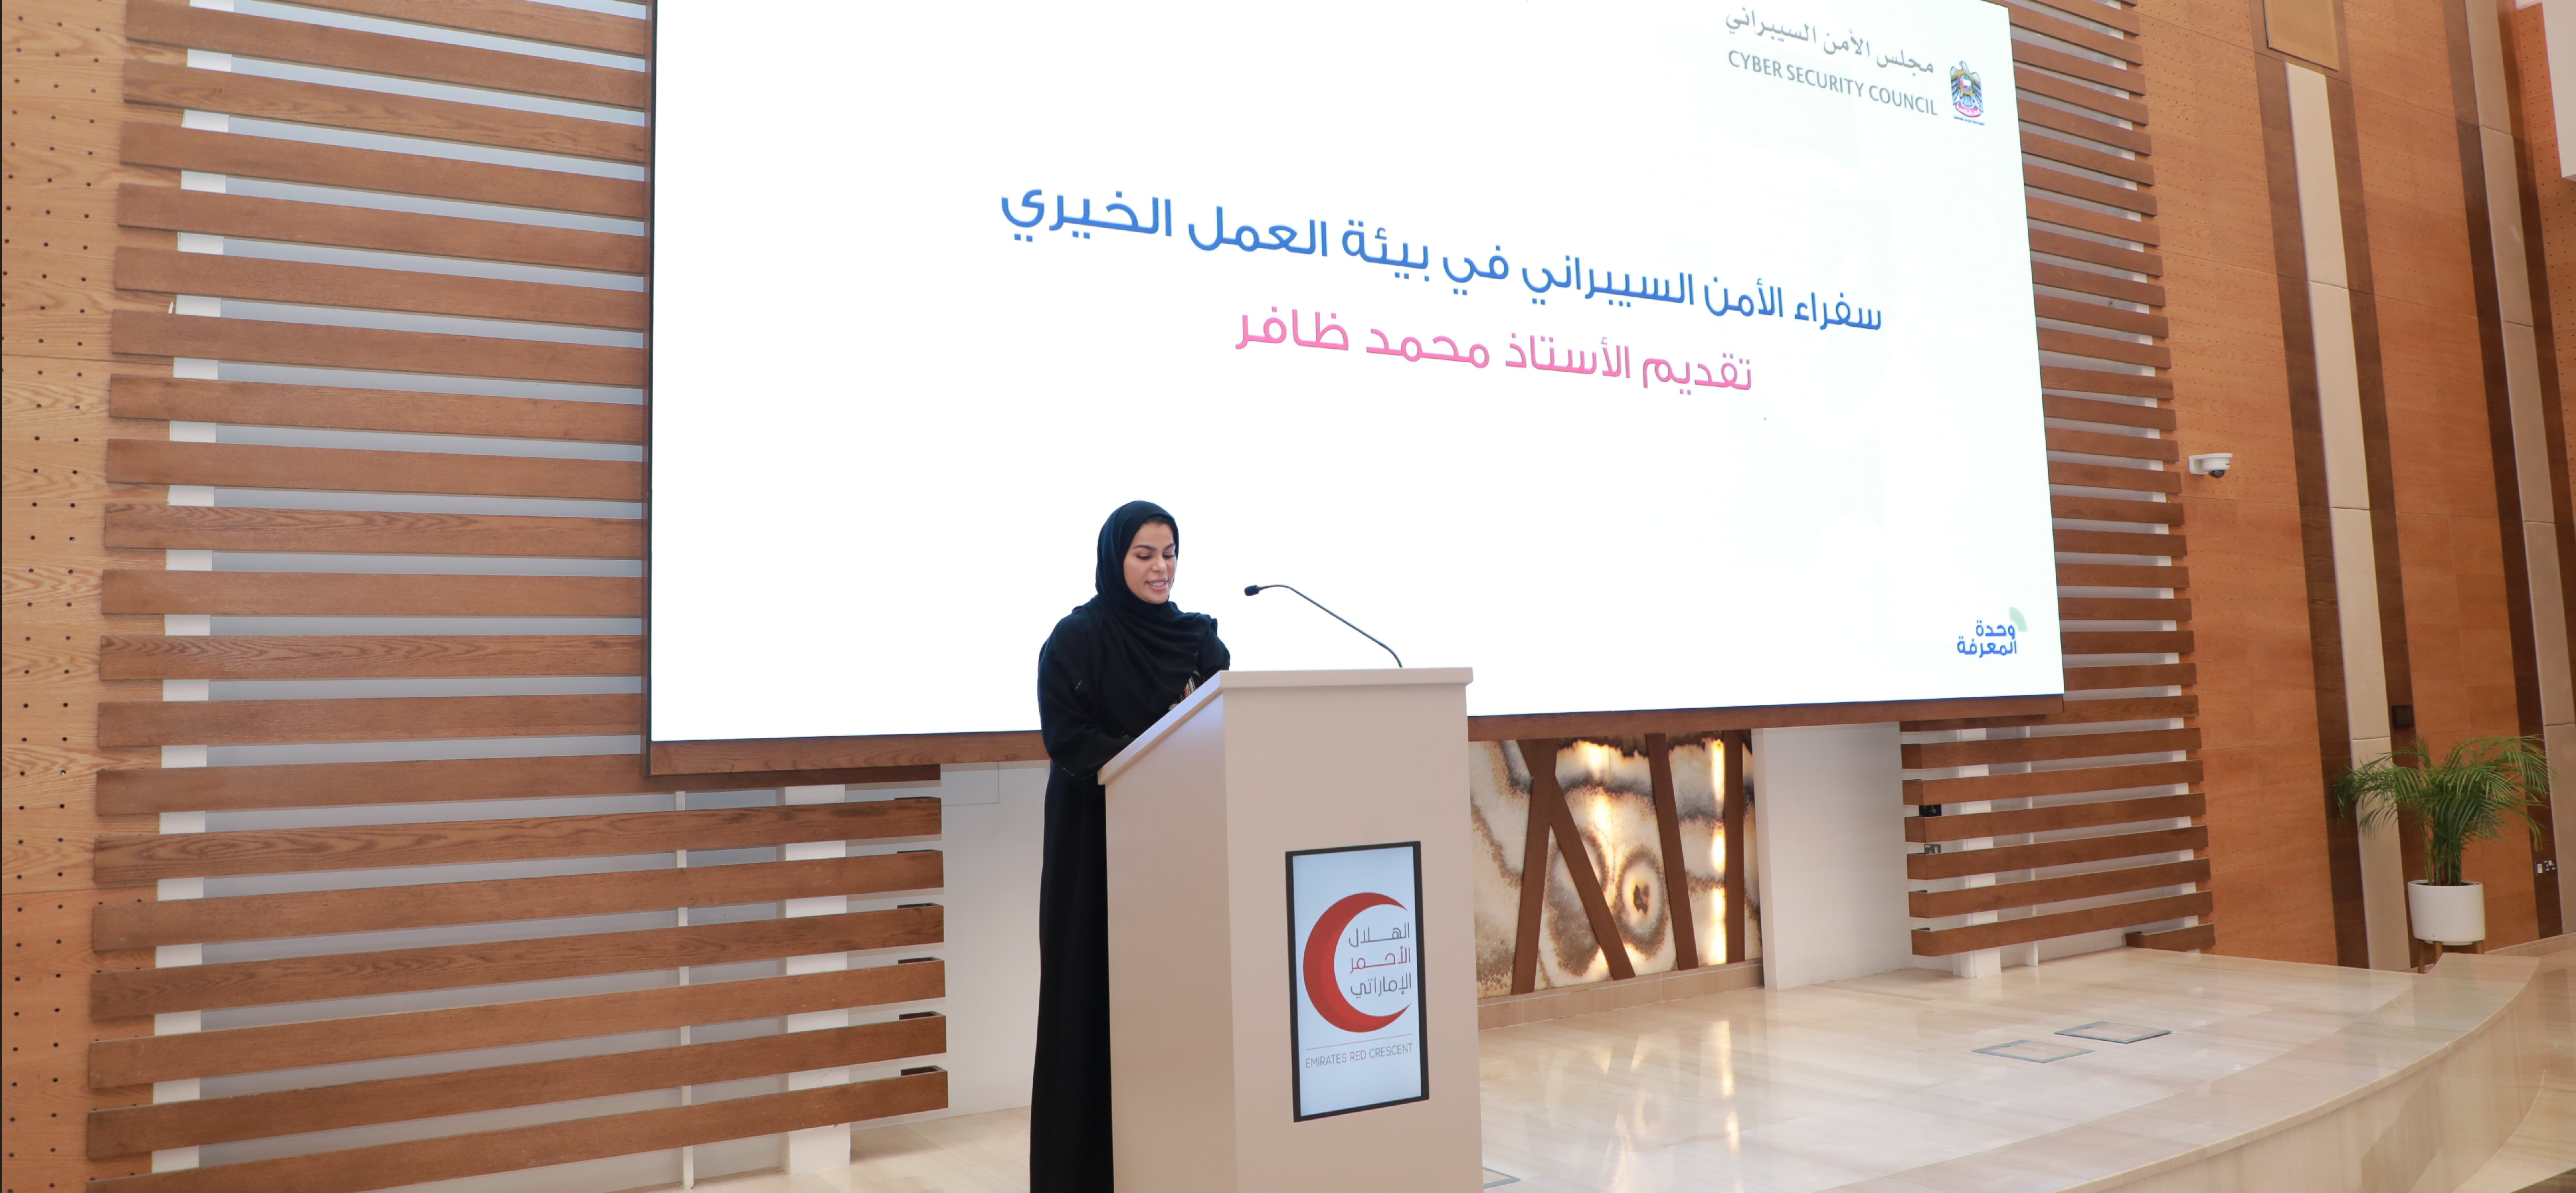 The Cyber Pulse Ambassadors program launches the start of the collaboration between the UAE Cyber Security Council and the Red Crescent Society of the United Arab Emirates